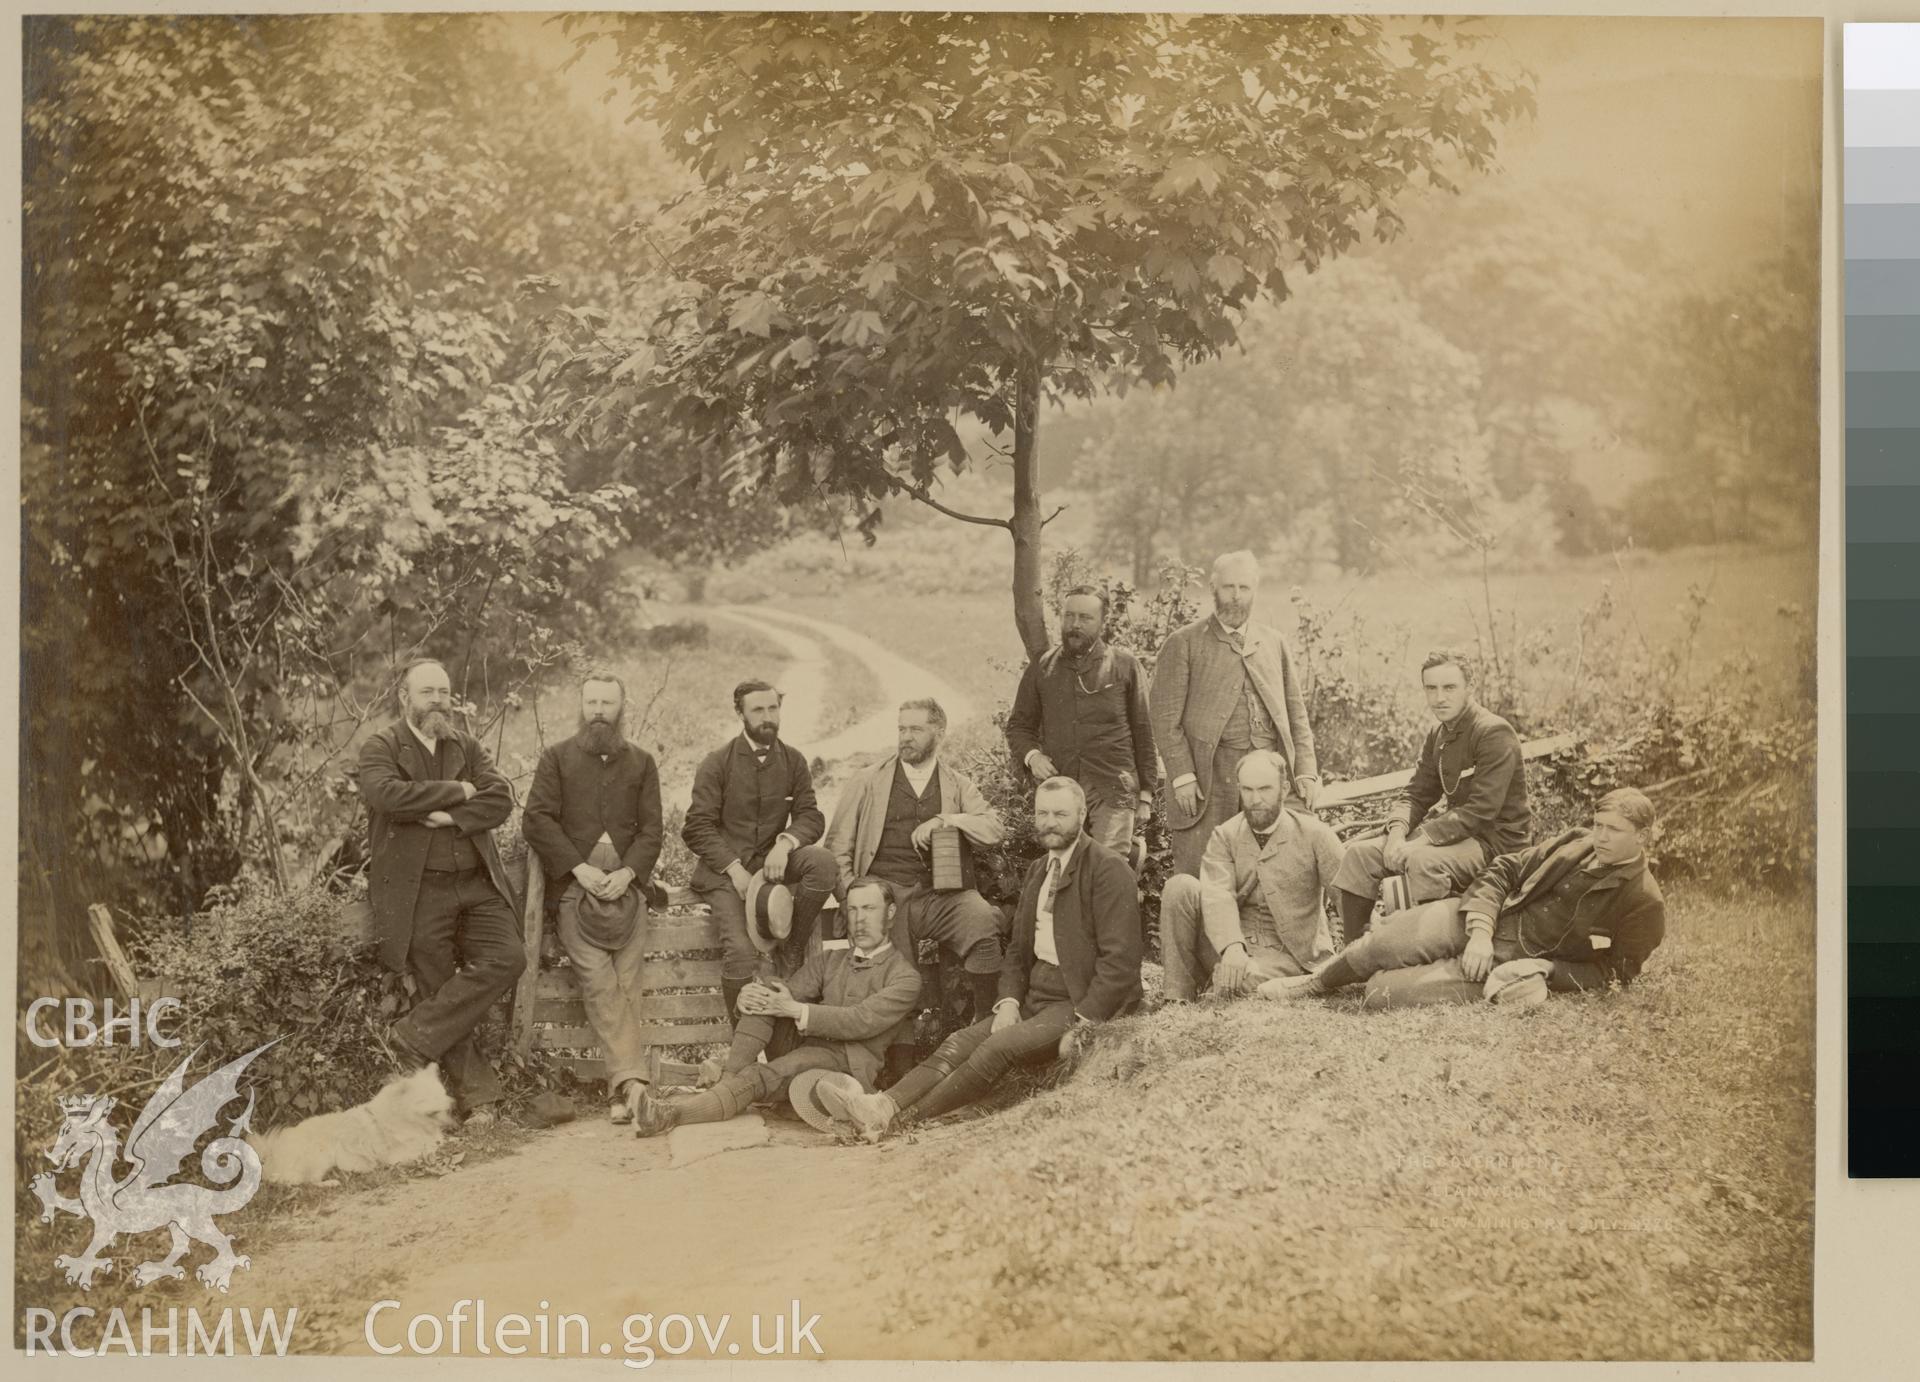 Digital copy of an albumen print from the Edward Hubbard Collection. Album 'Lake Vyrnwy Photographs' print entitled 'The Boys of the Old Brigade' showing a group portrait.